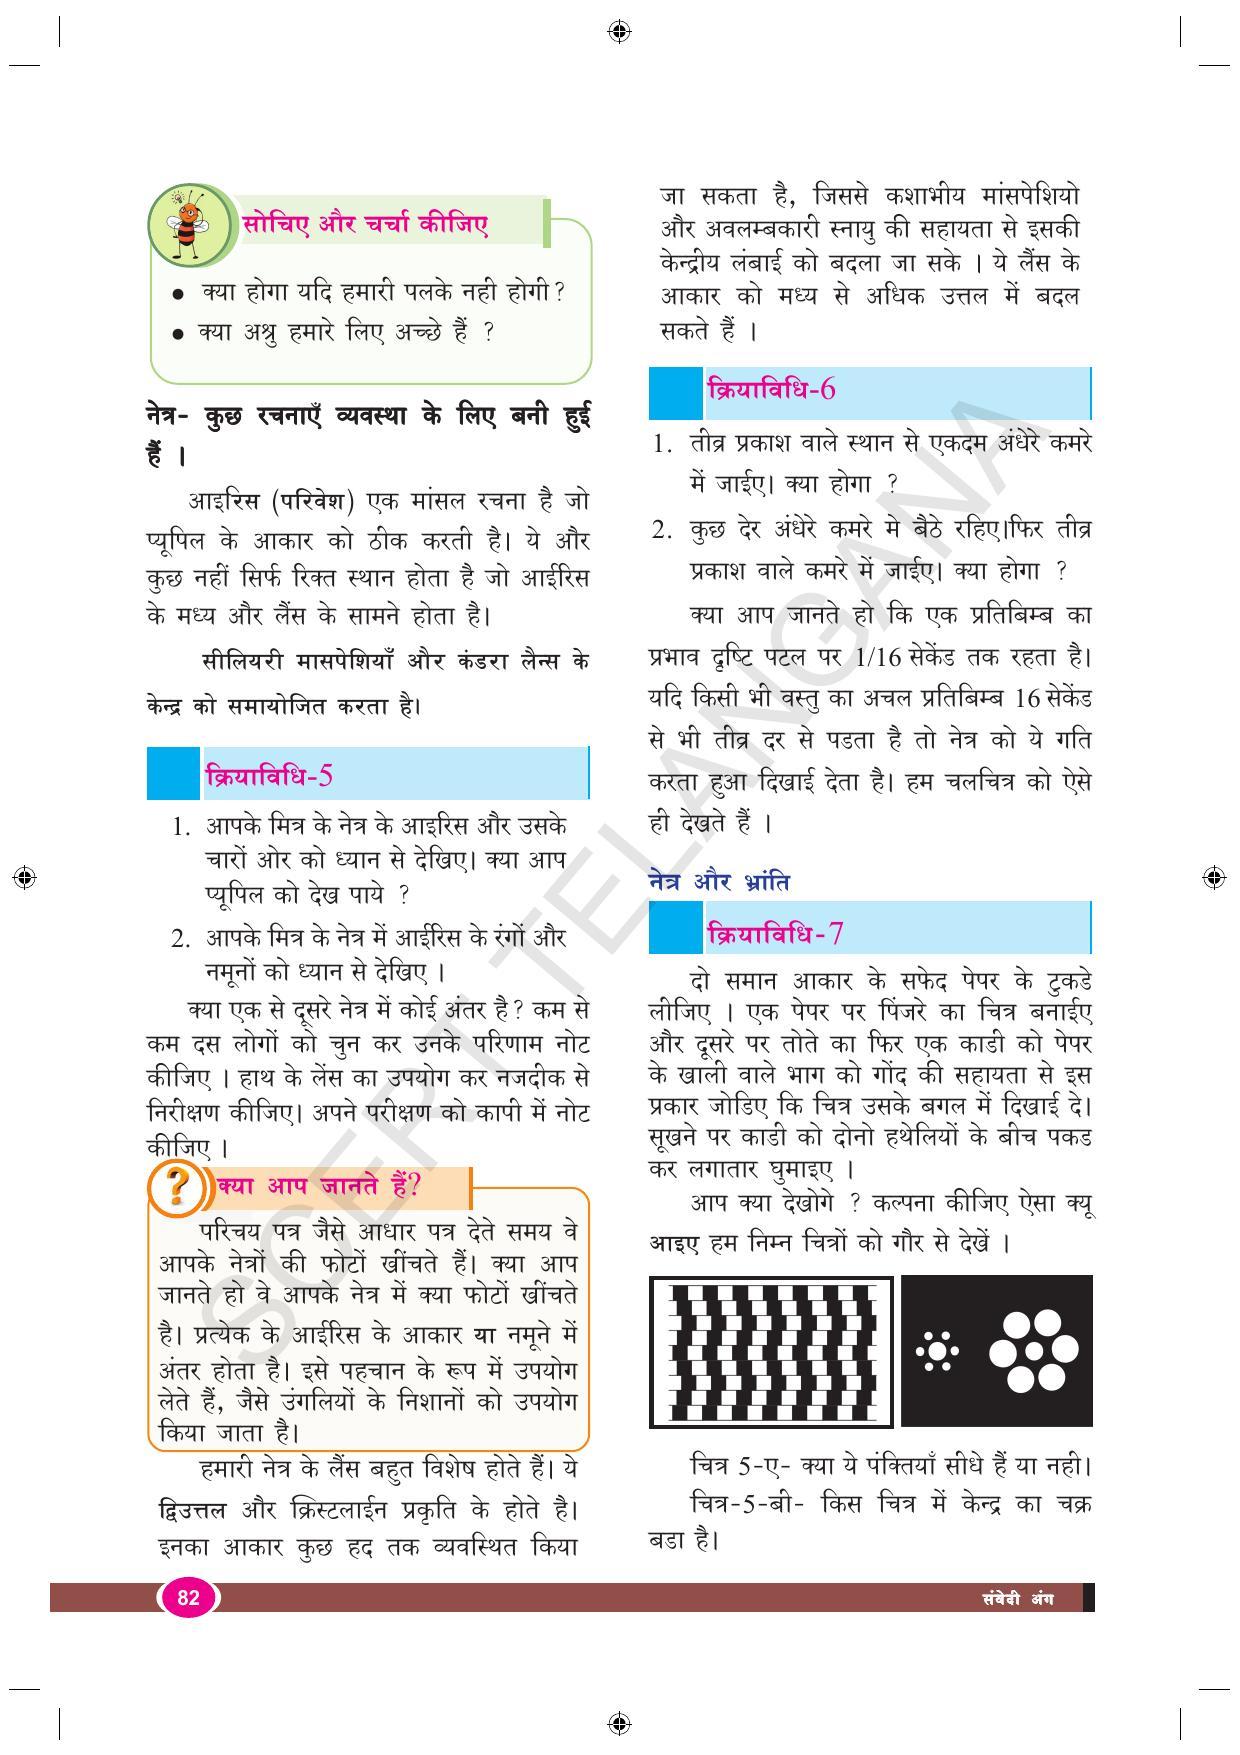 TS SCERT Class 9 Biological Science (Hindi Medium) Text Book - Page 94